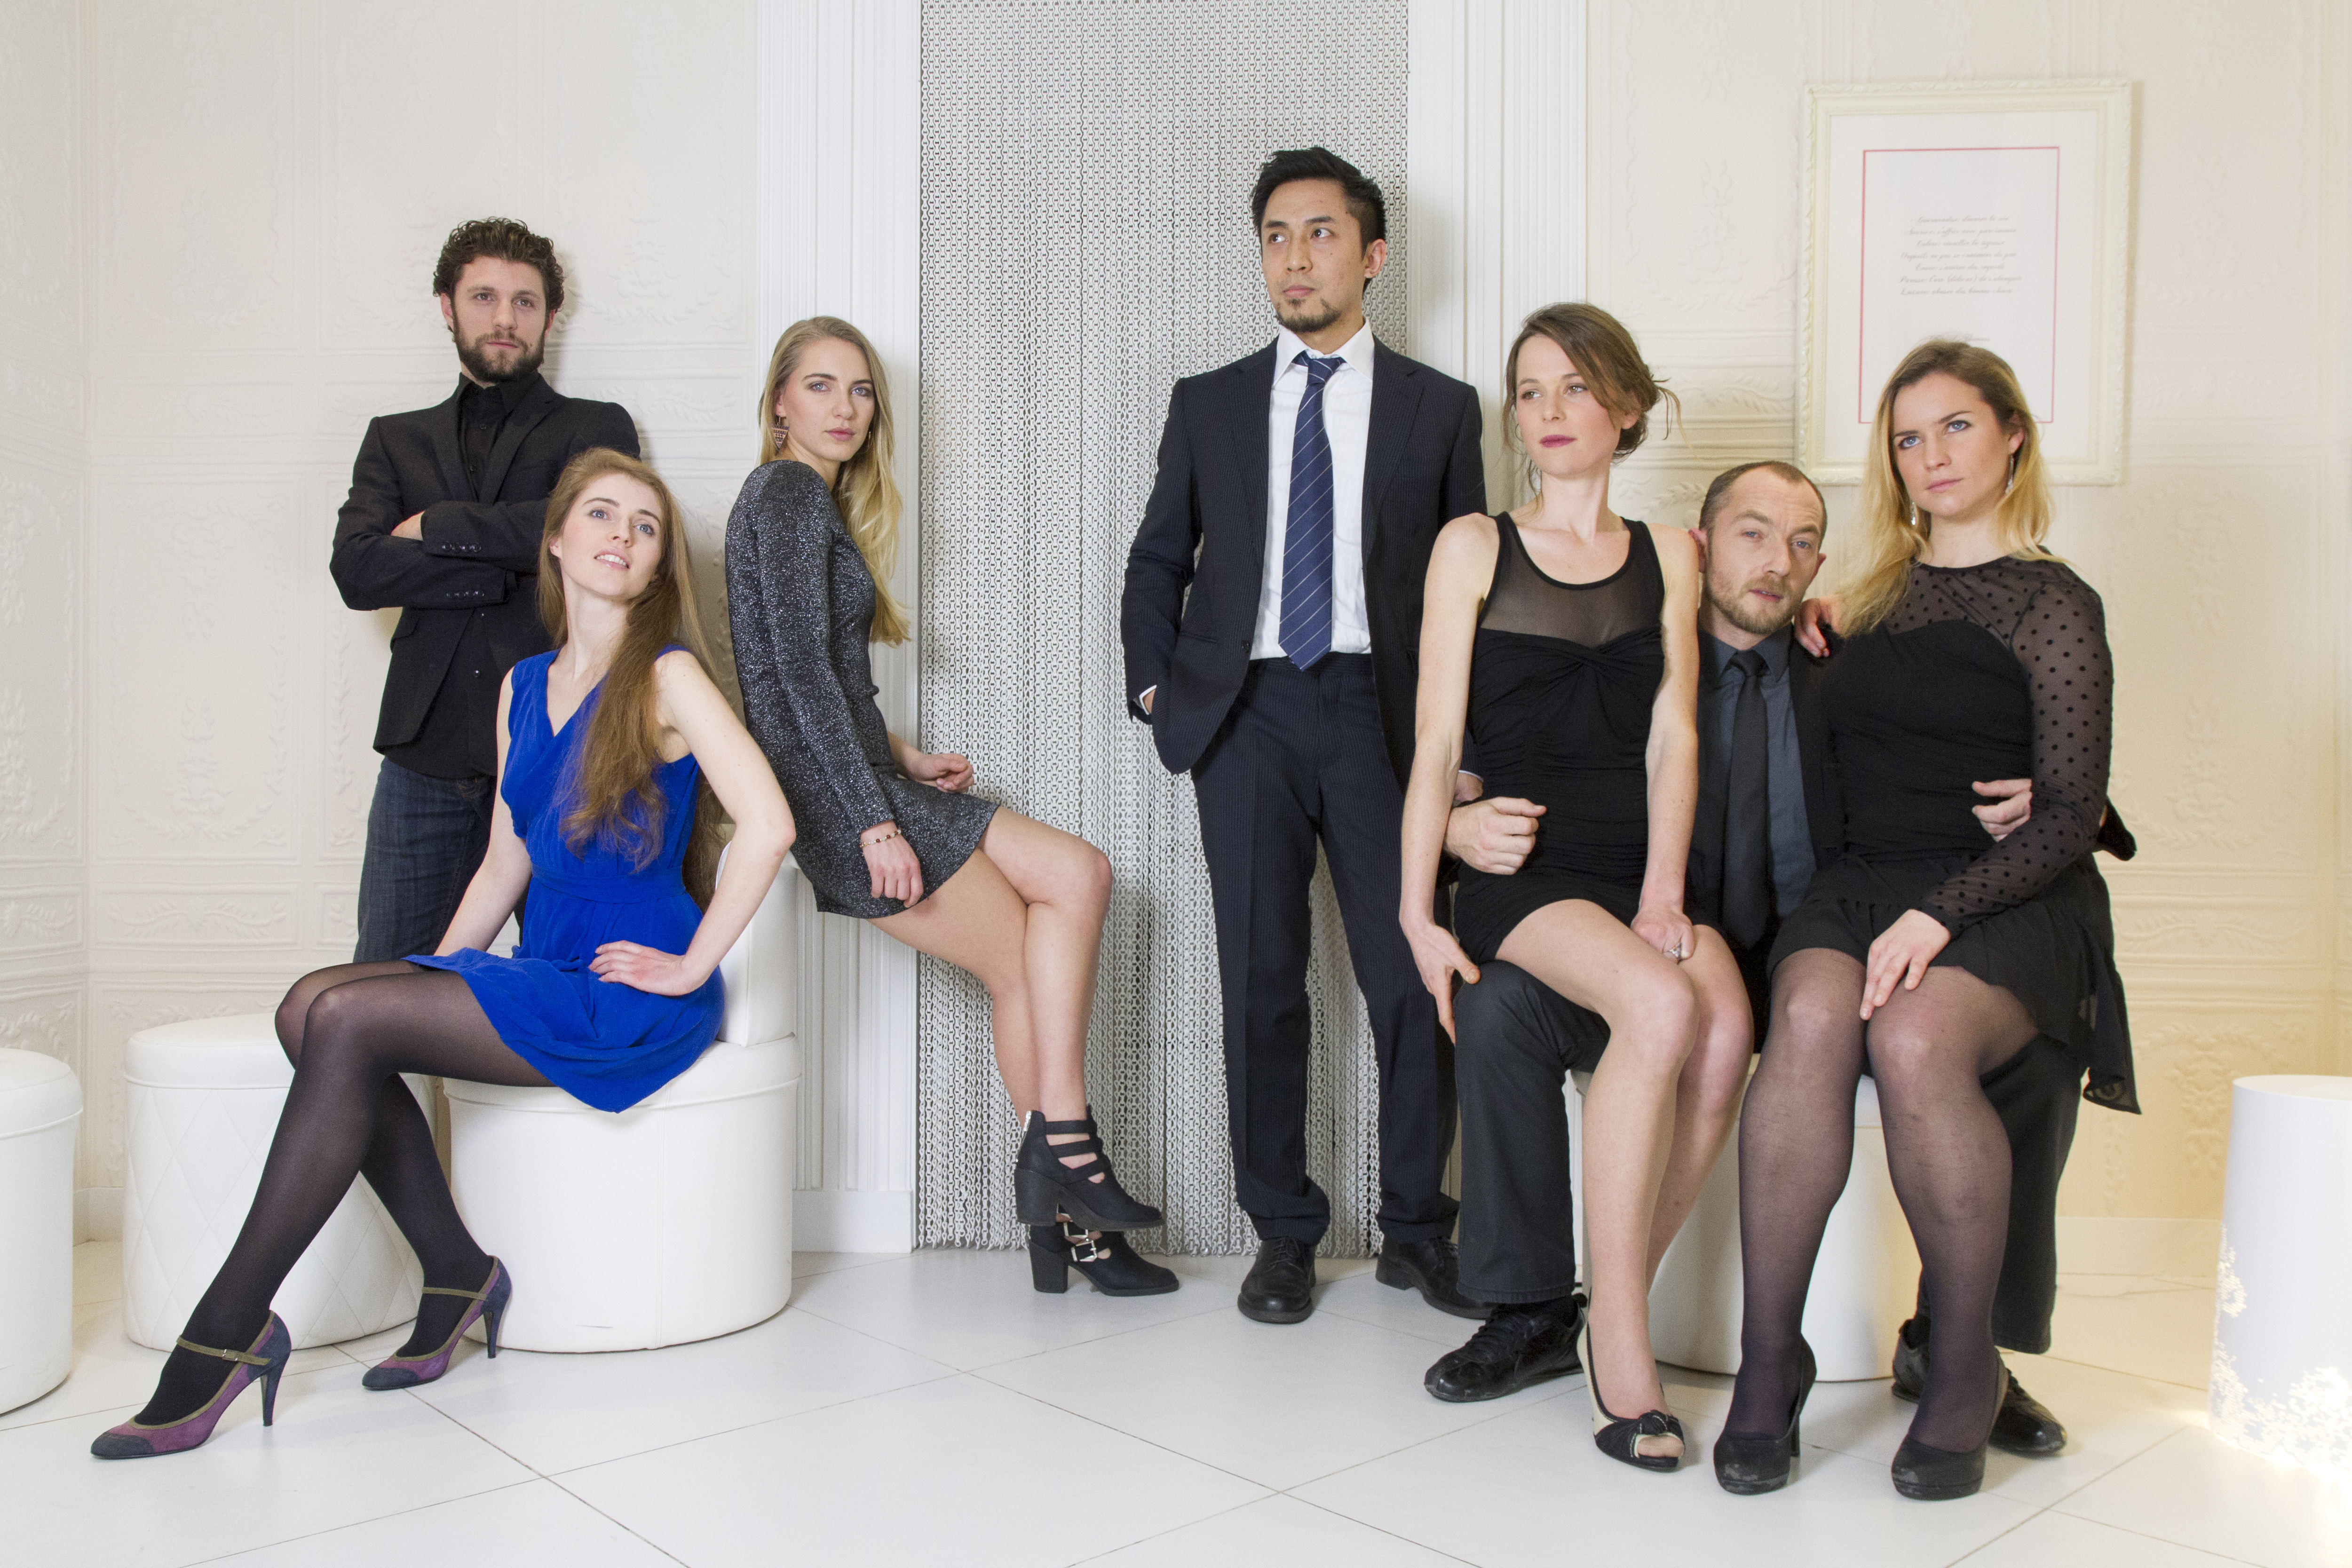 From left to right: Michael Abaï, Delphine Lanniel, Charlotte Déniel, Eric Truong, Morwenna Spagnol, Stéphen Scardicchio and Nathalie Couturier.